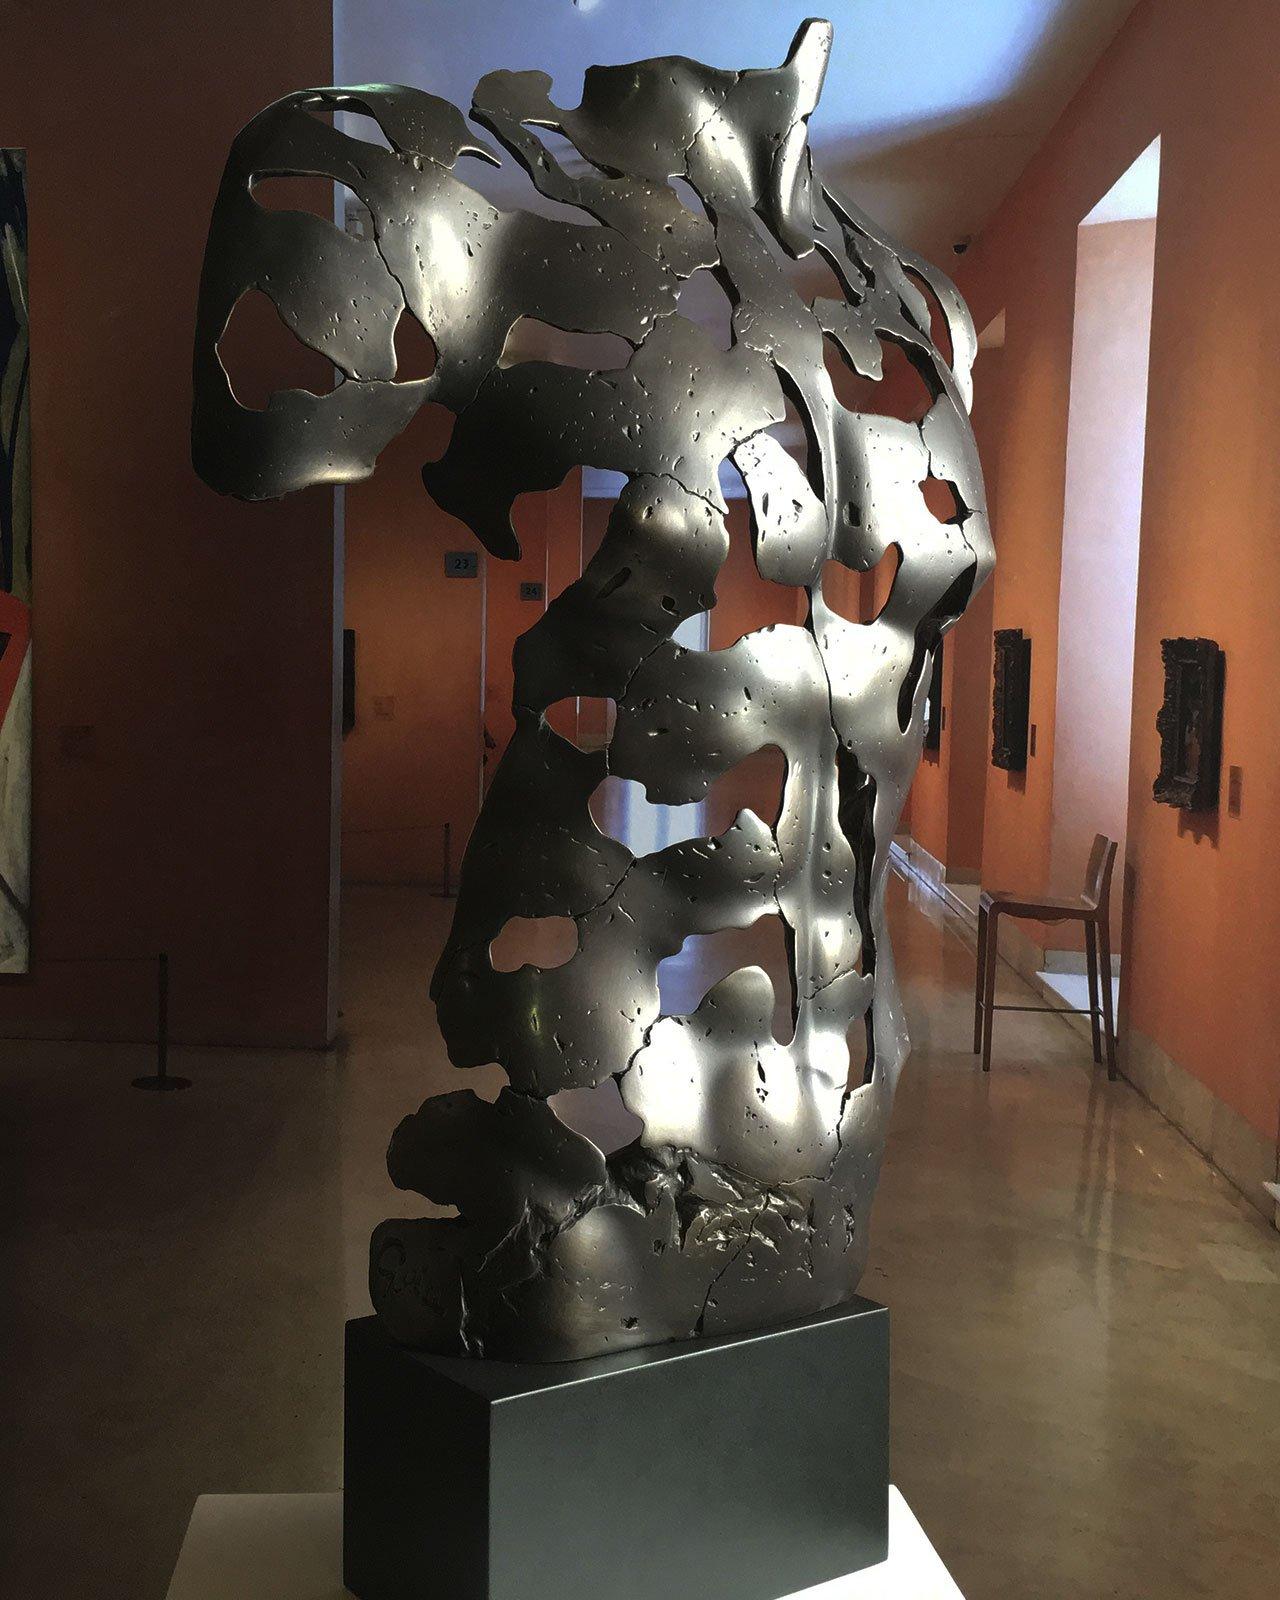 Expressionist Sculpture "The Essence of Masculinity" by Miguel Guía.
The sculpture is made of a layer of bronze on cold smelting of copper with the base of graphite or marble dust.
Limited edition of 150 works.
Although the required time to deliver